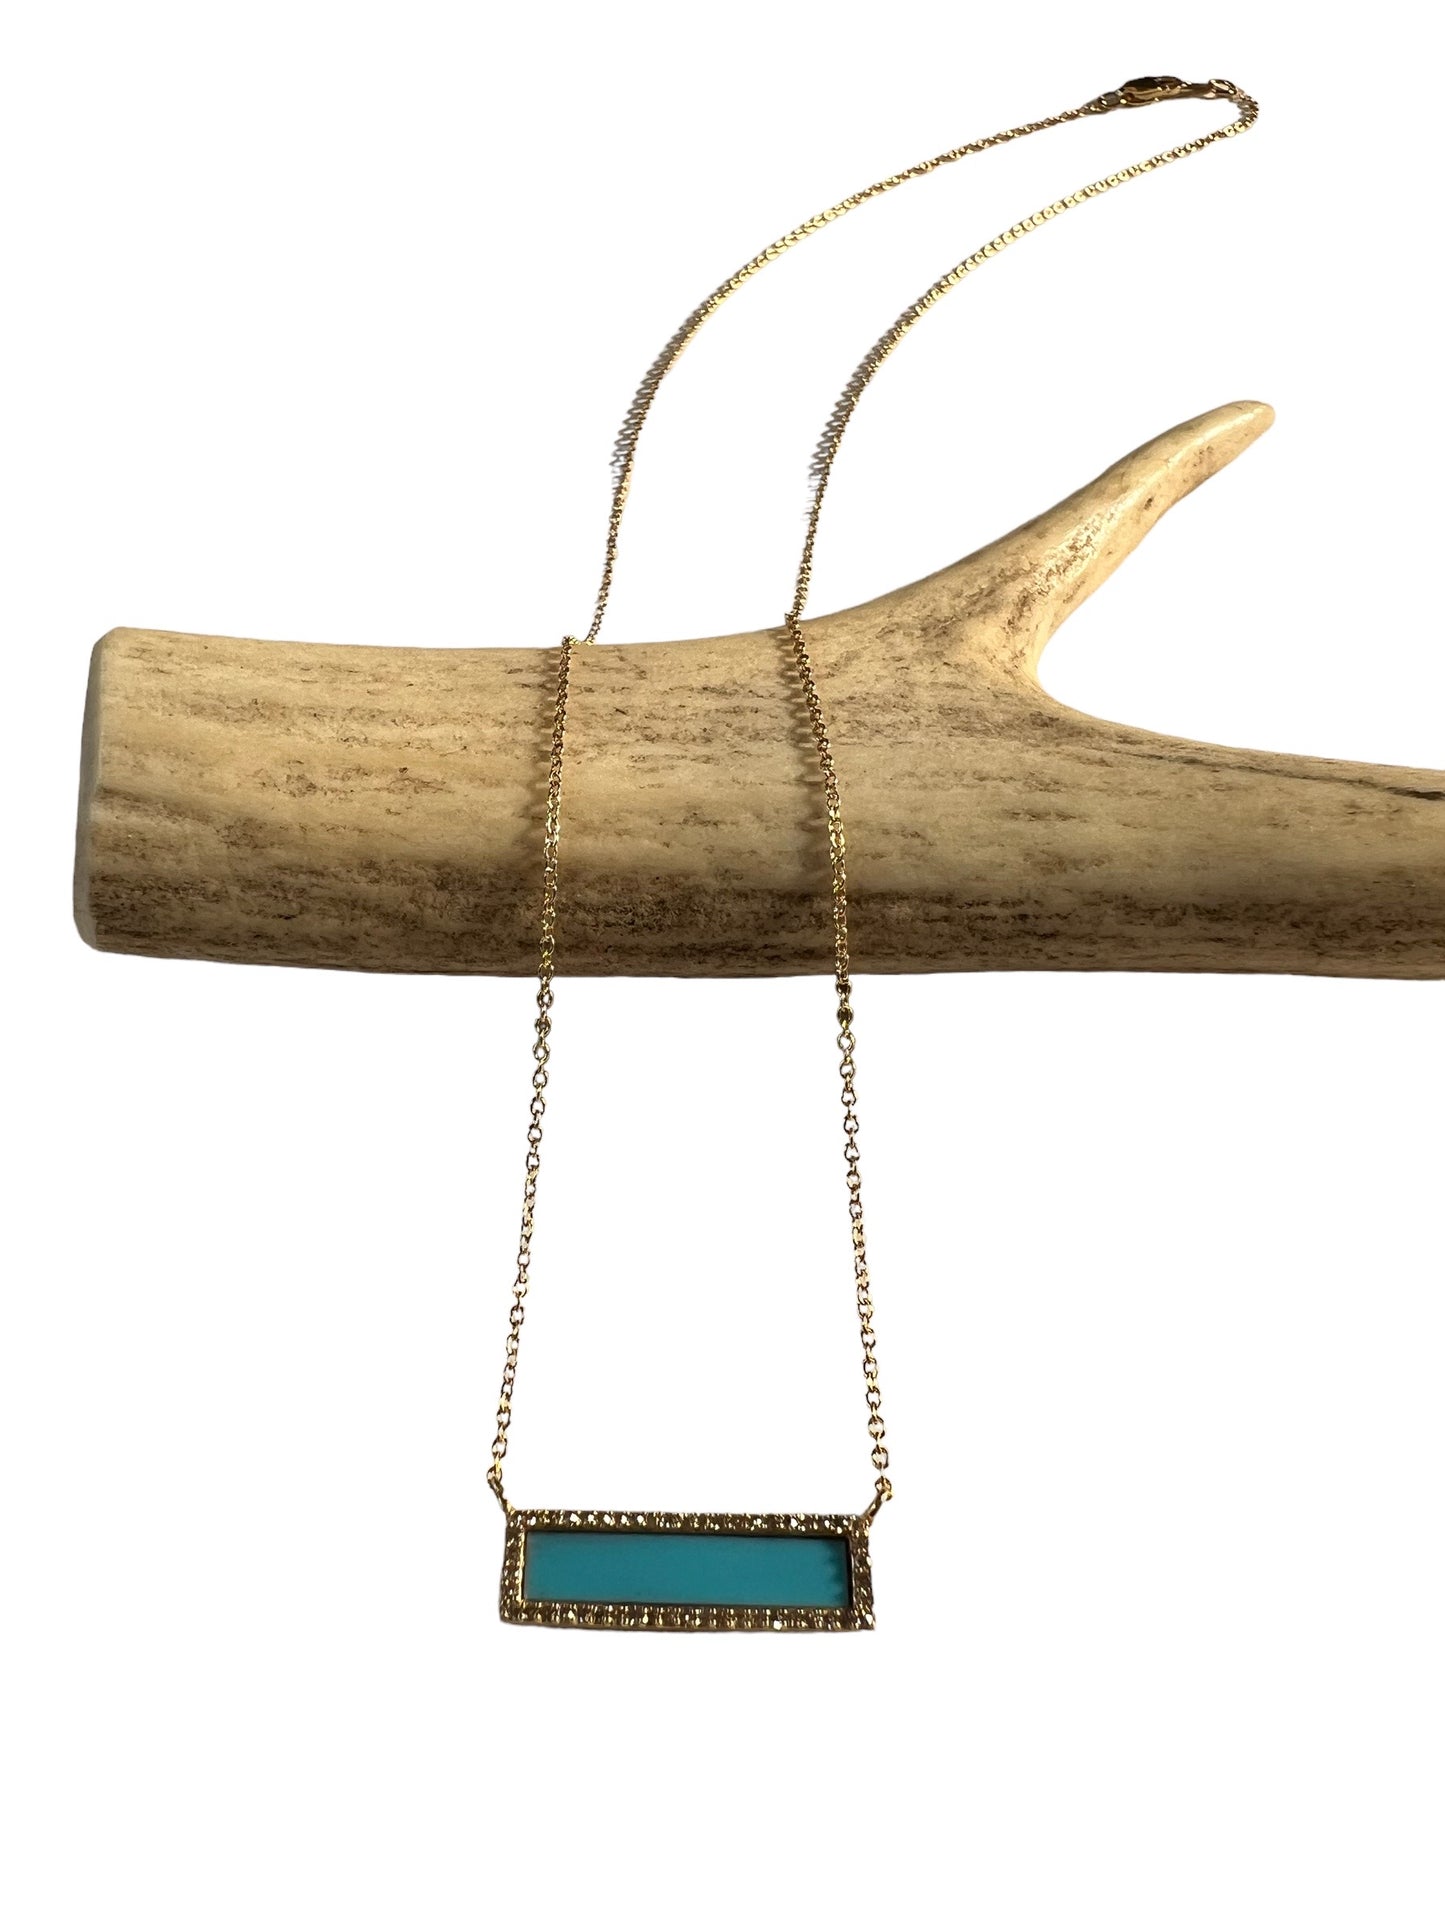 Gold & turquoise inlay necklace